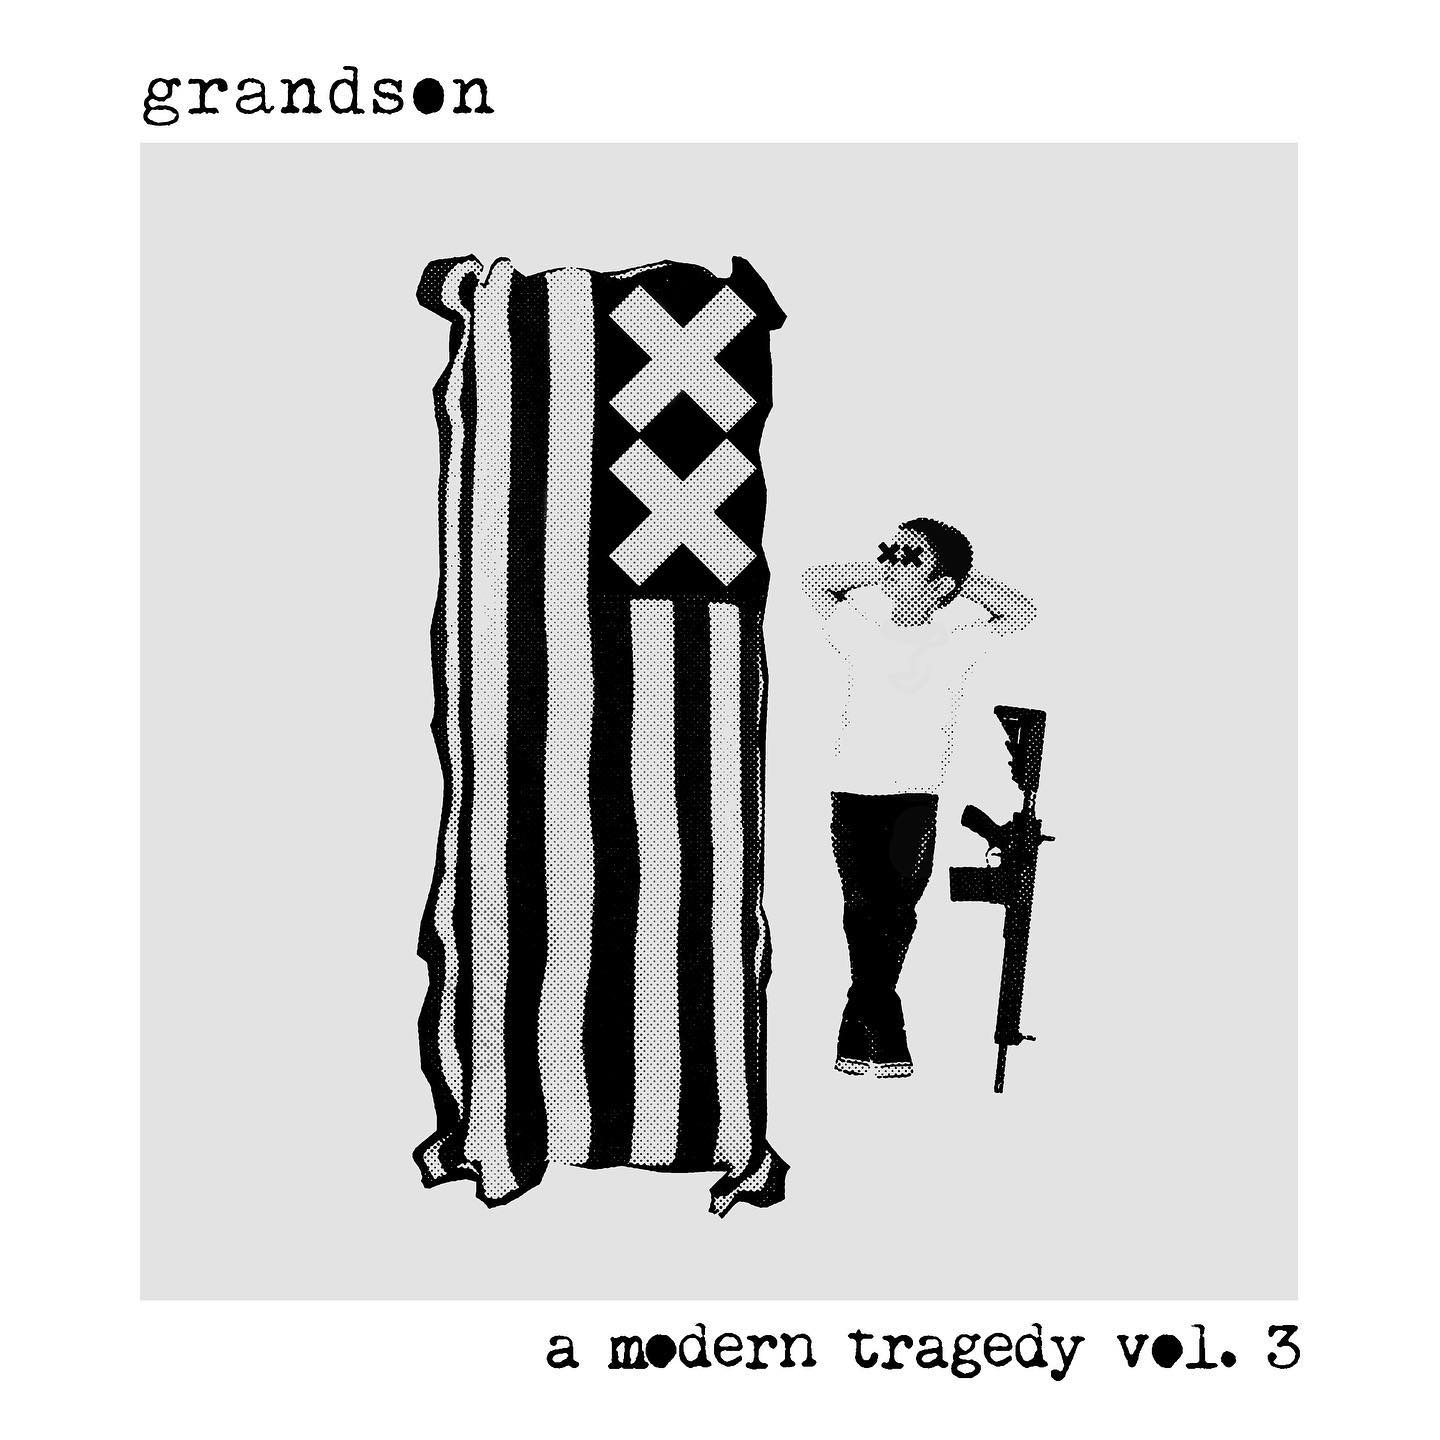 Review of grandson's EP “a modern tragedy vol. 2” – The Roar